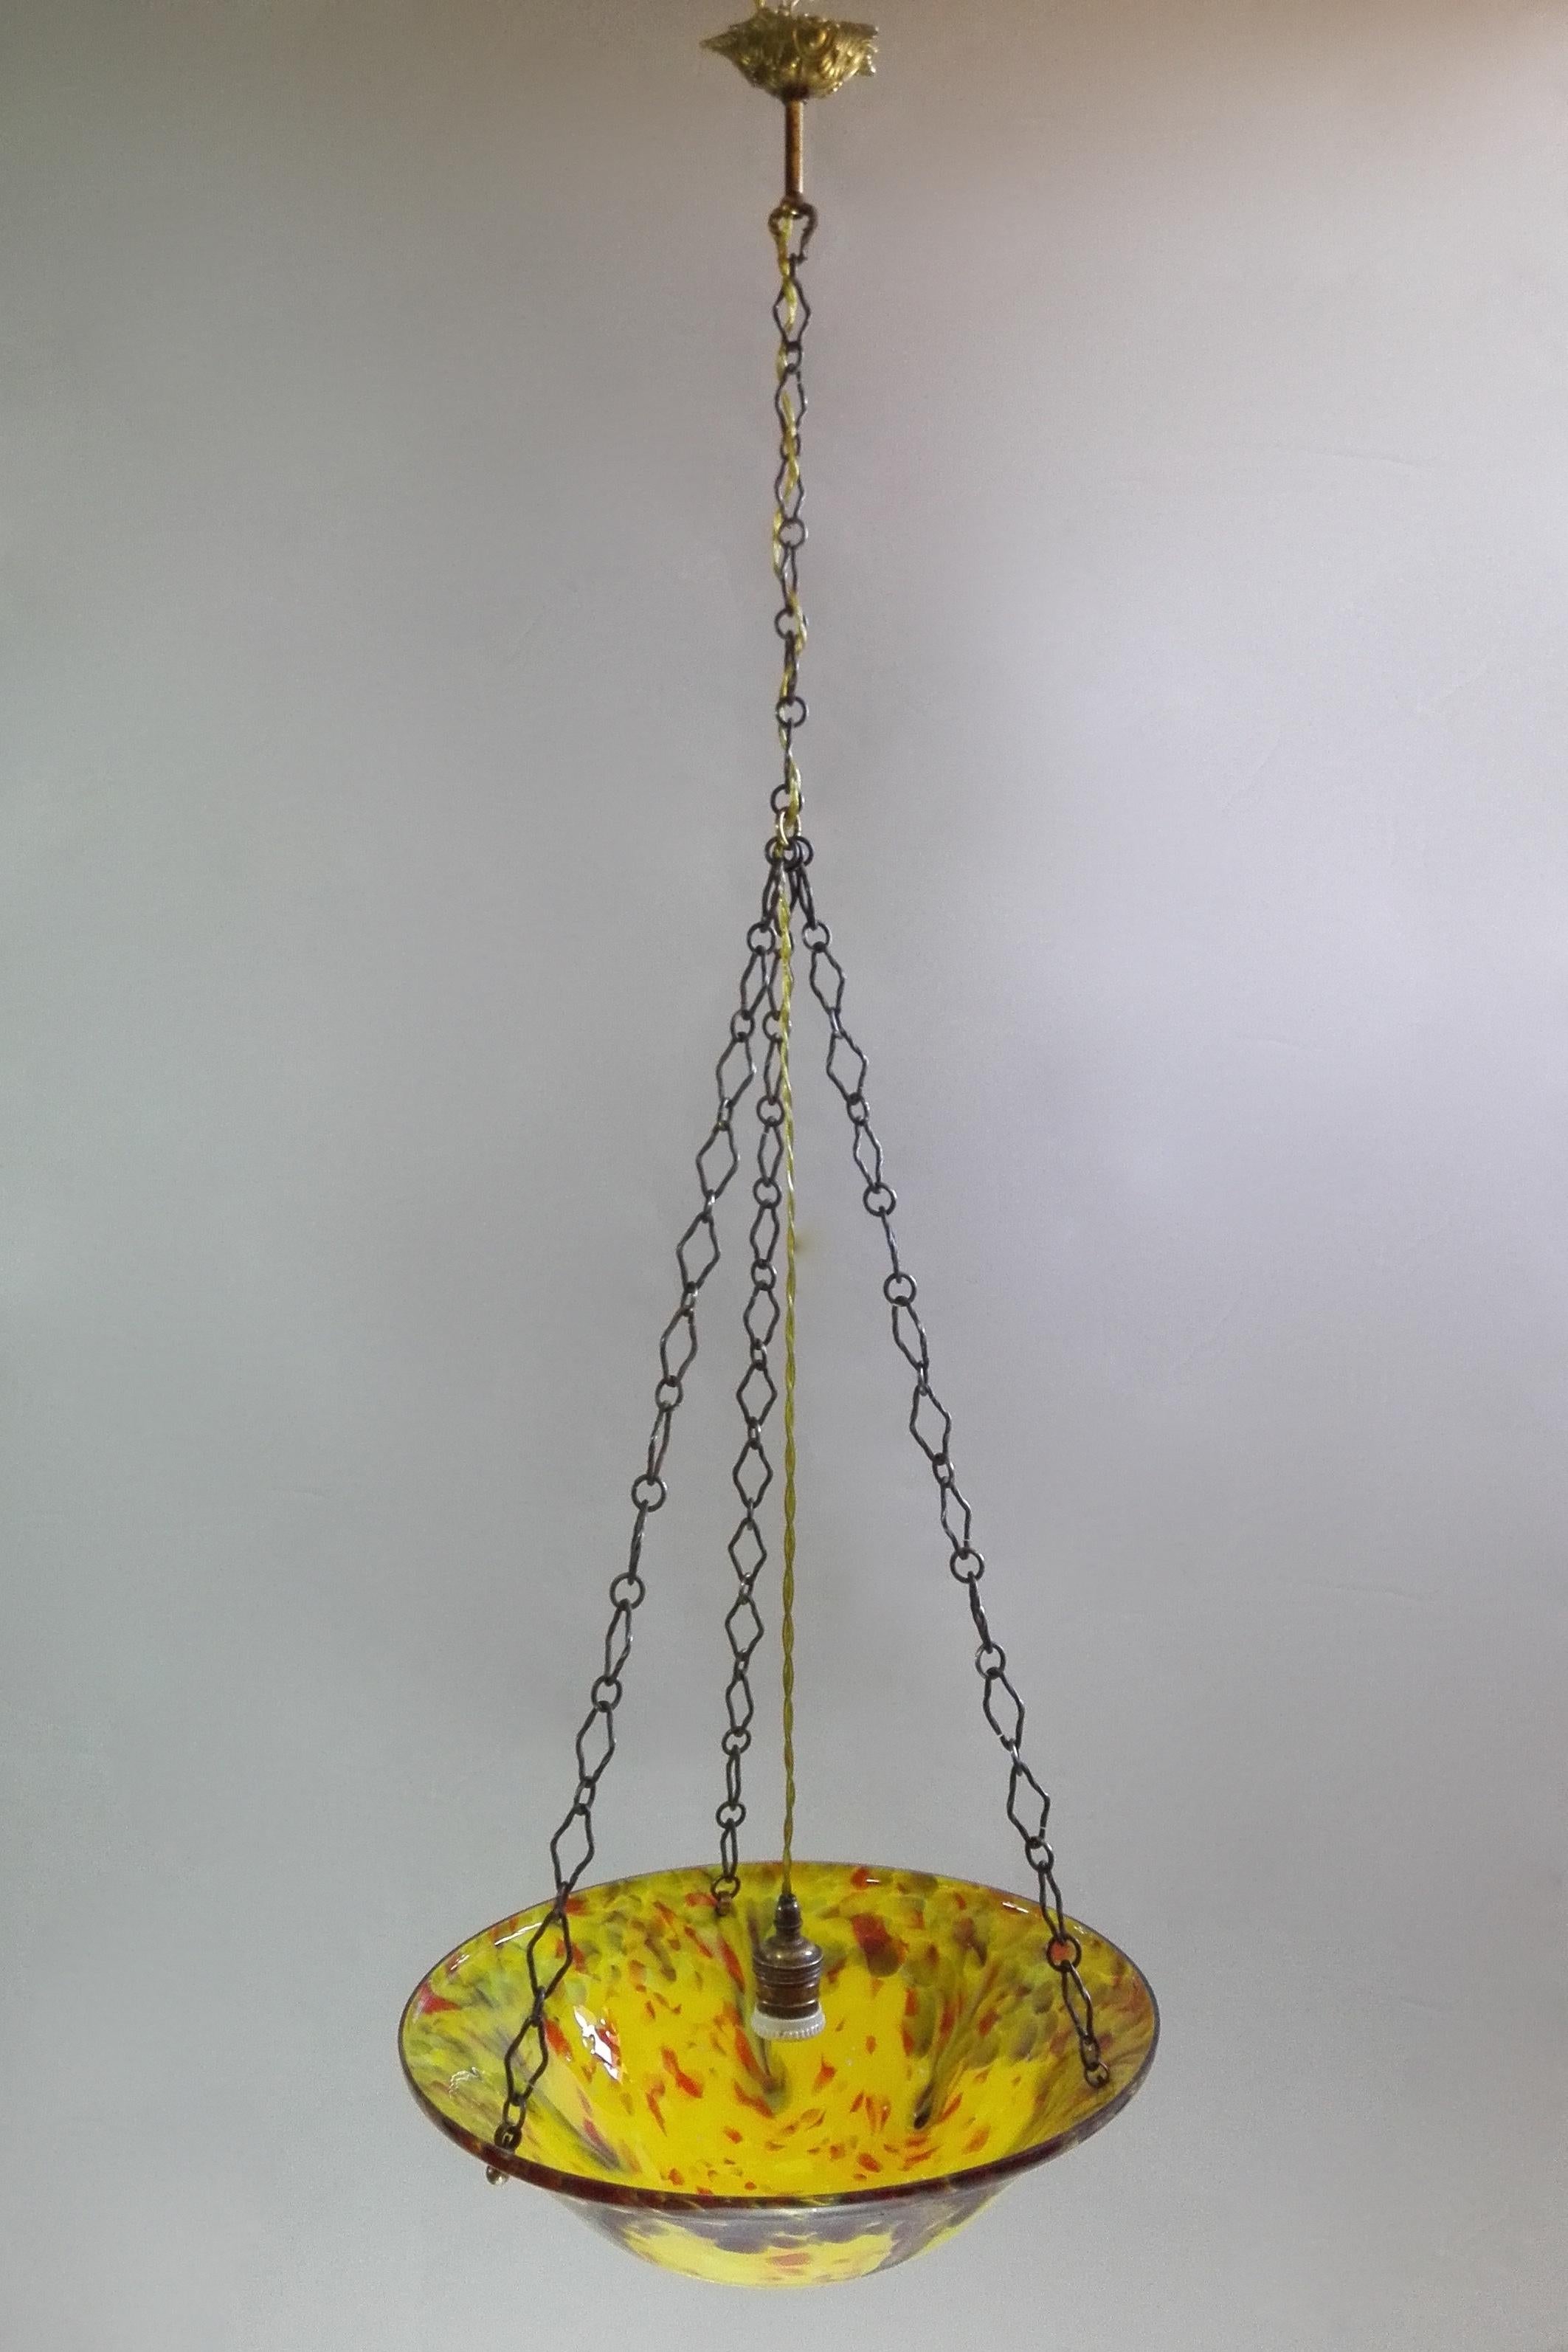 Art Deco 1940s one-light artistic hand-blown spotted glass pendant lamp featuring a particular patterned glass shade with variegated colors. The lamp is hung by three nice original metal chains that come together in a single chain towards the